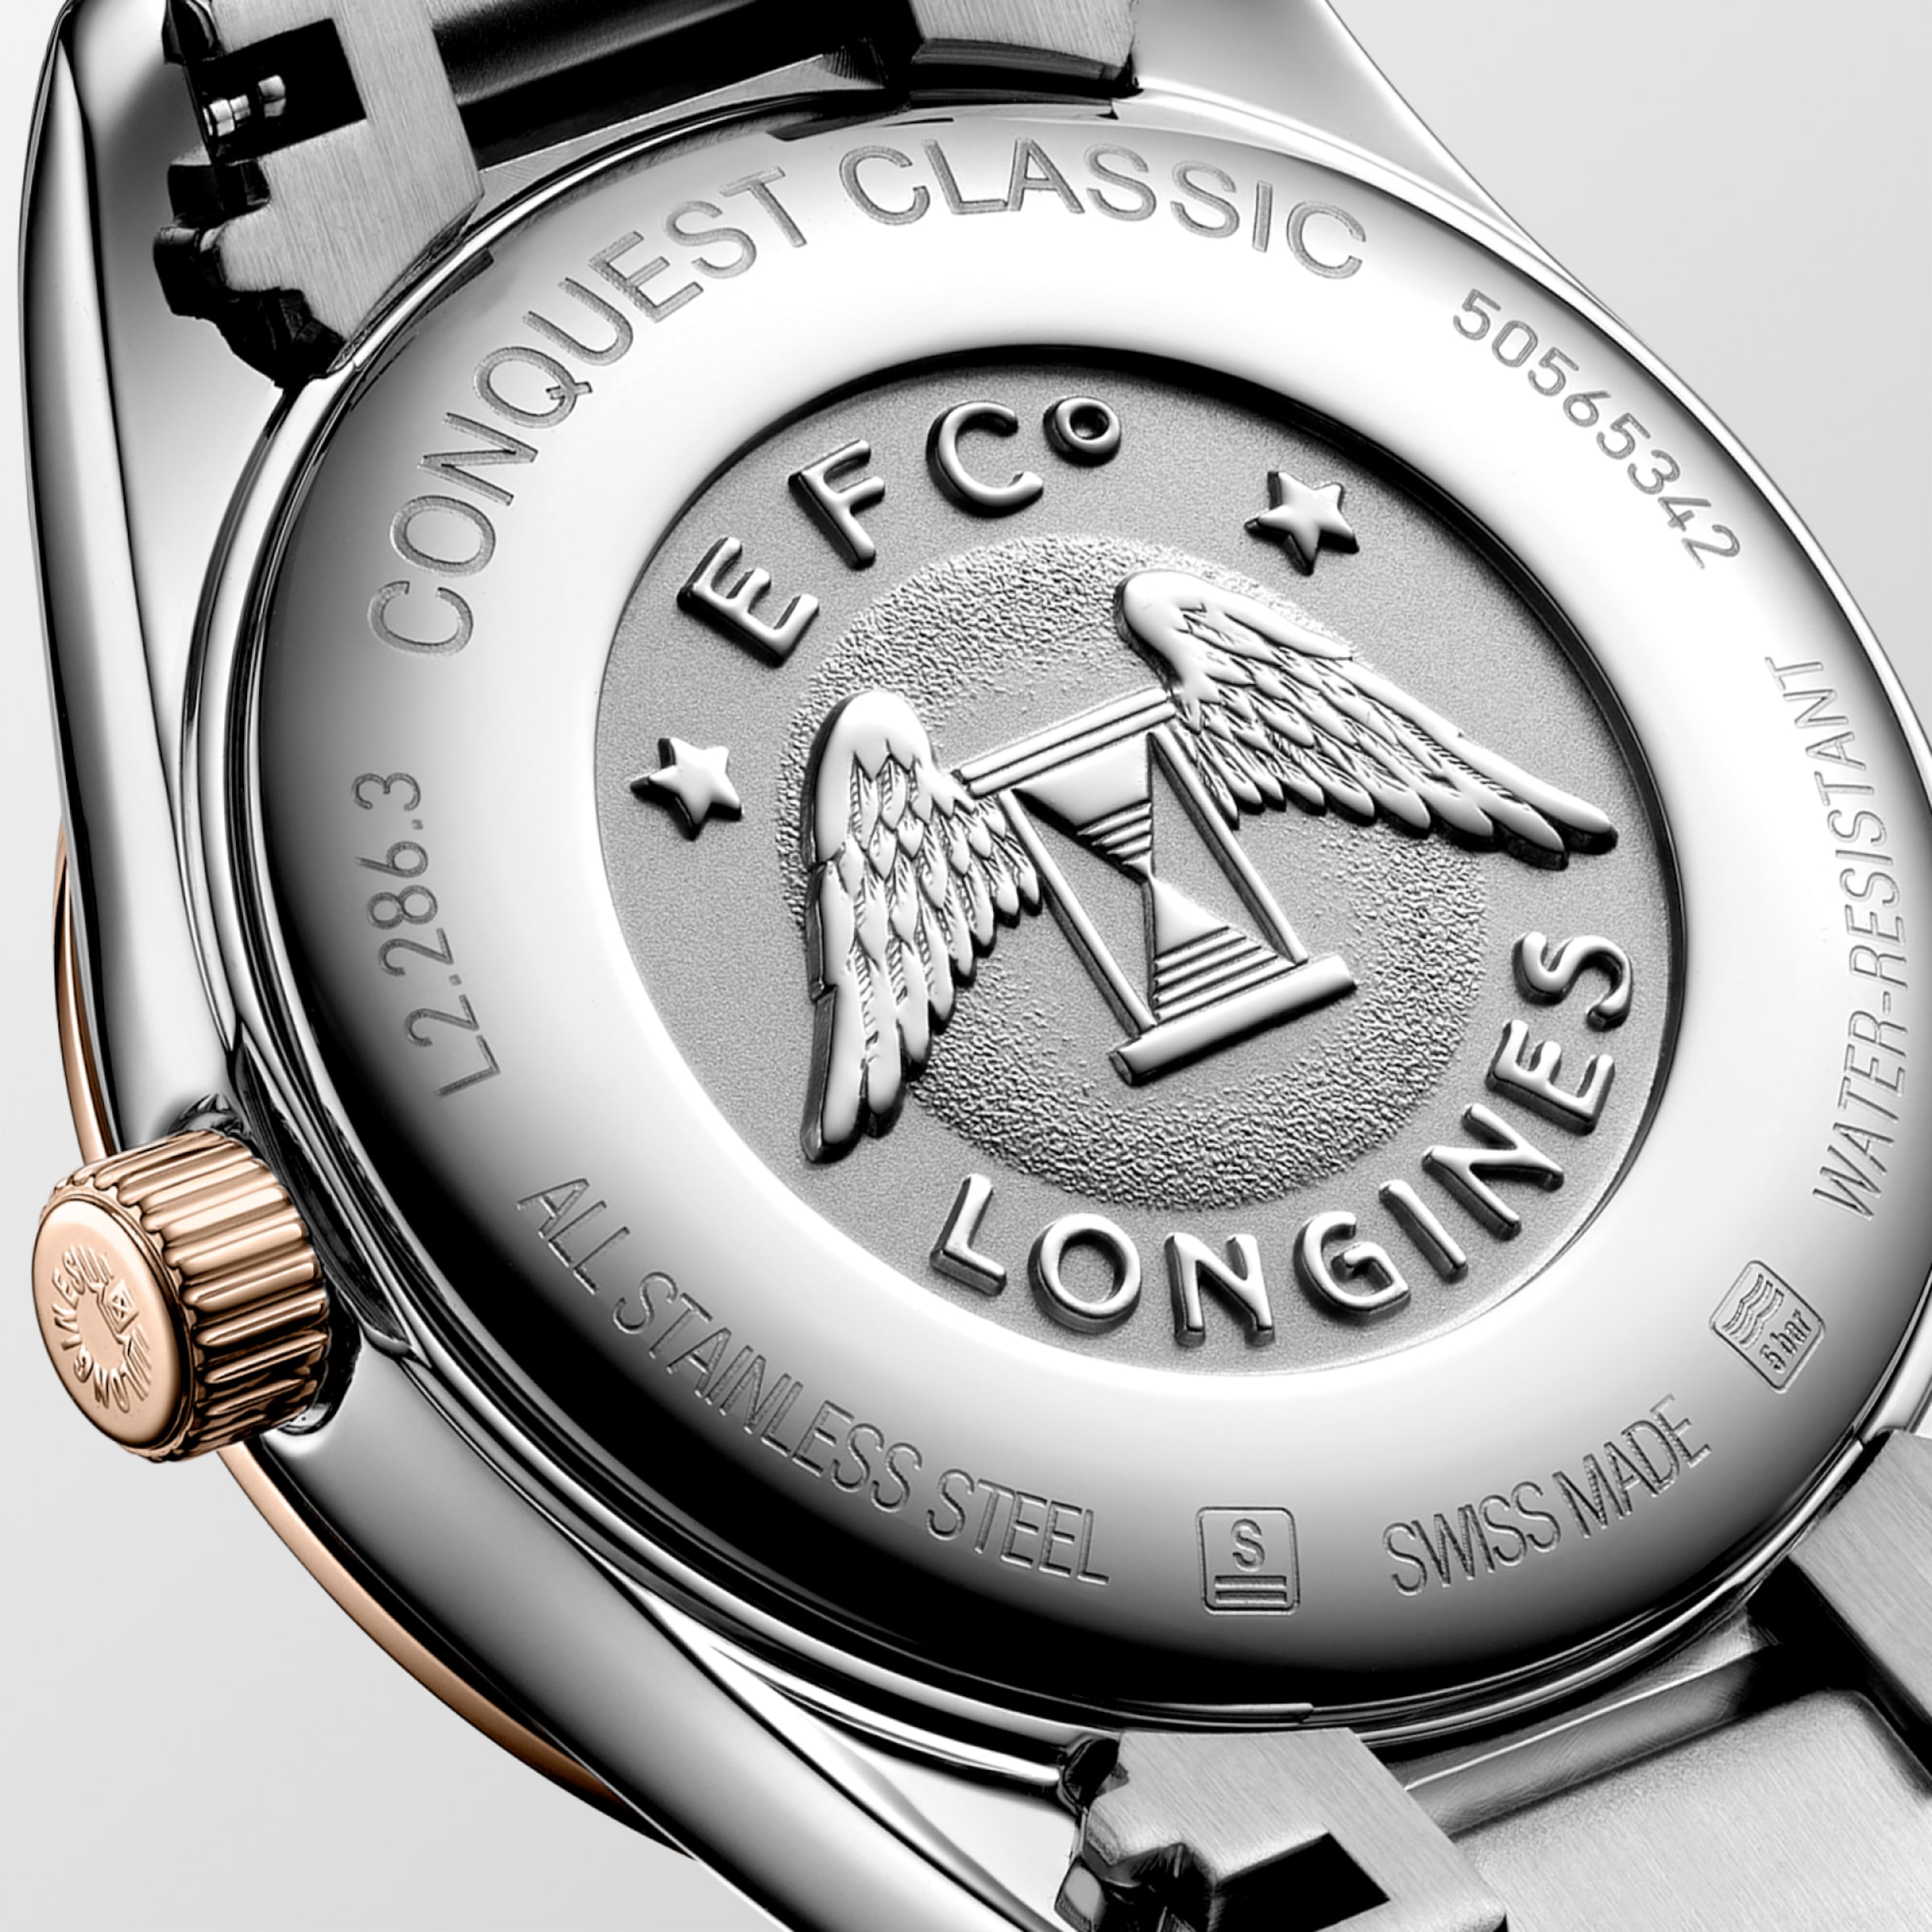 Longines CONQUEST CLASSIC Quartz Stainless steel and red PVD coating Watch - L2.286.3.92.7